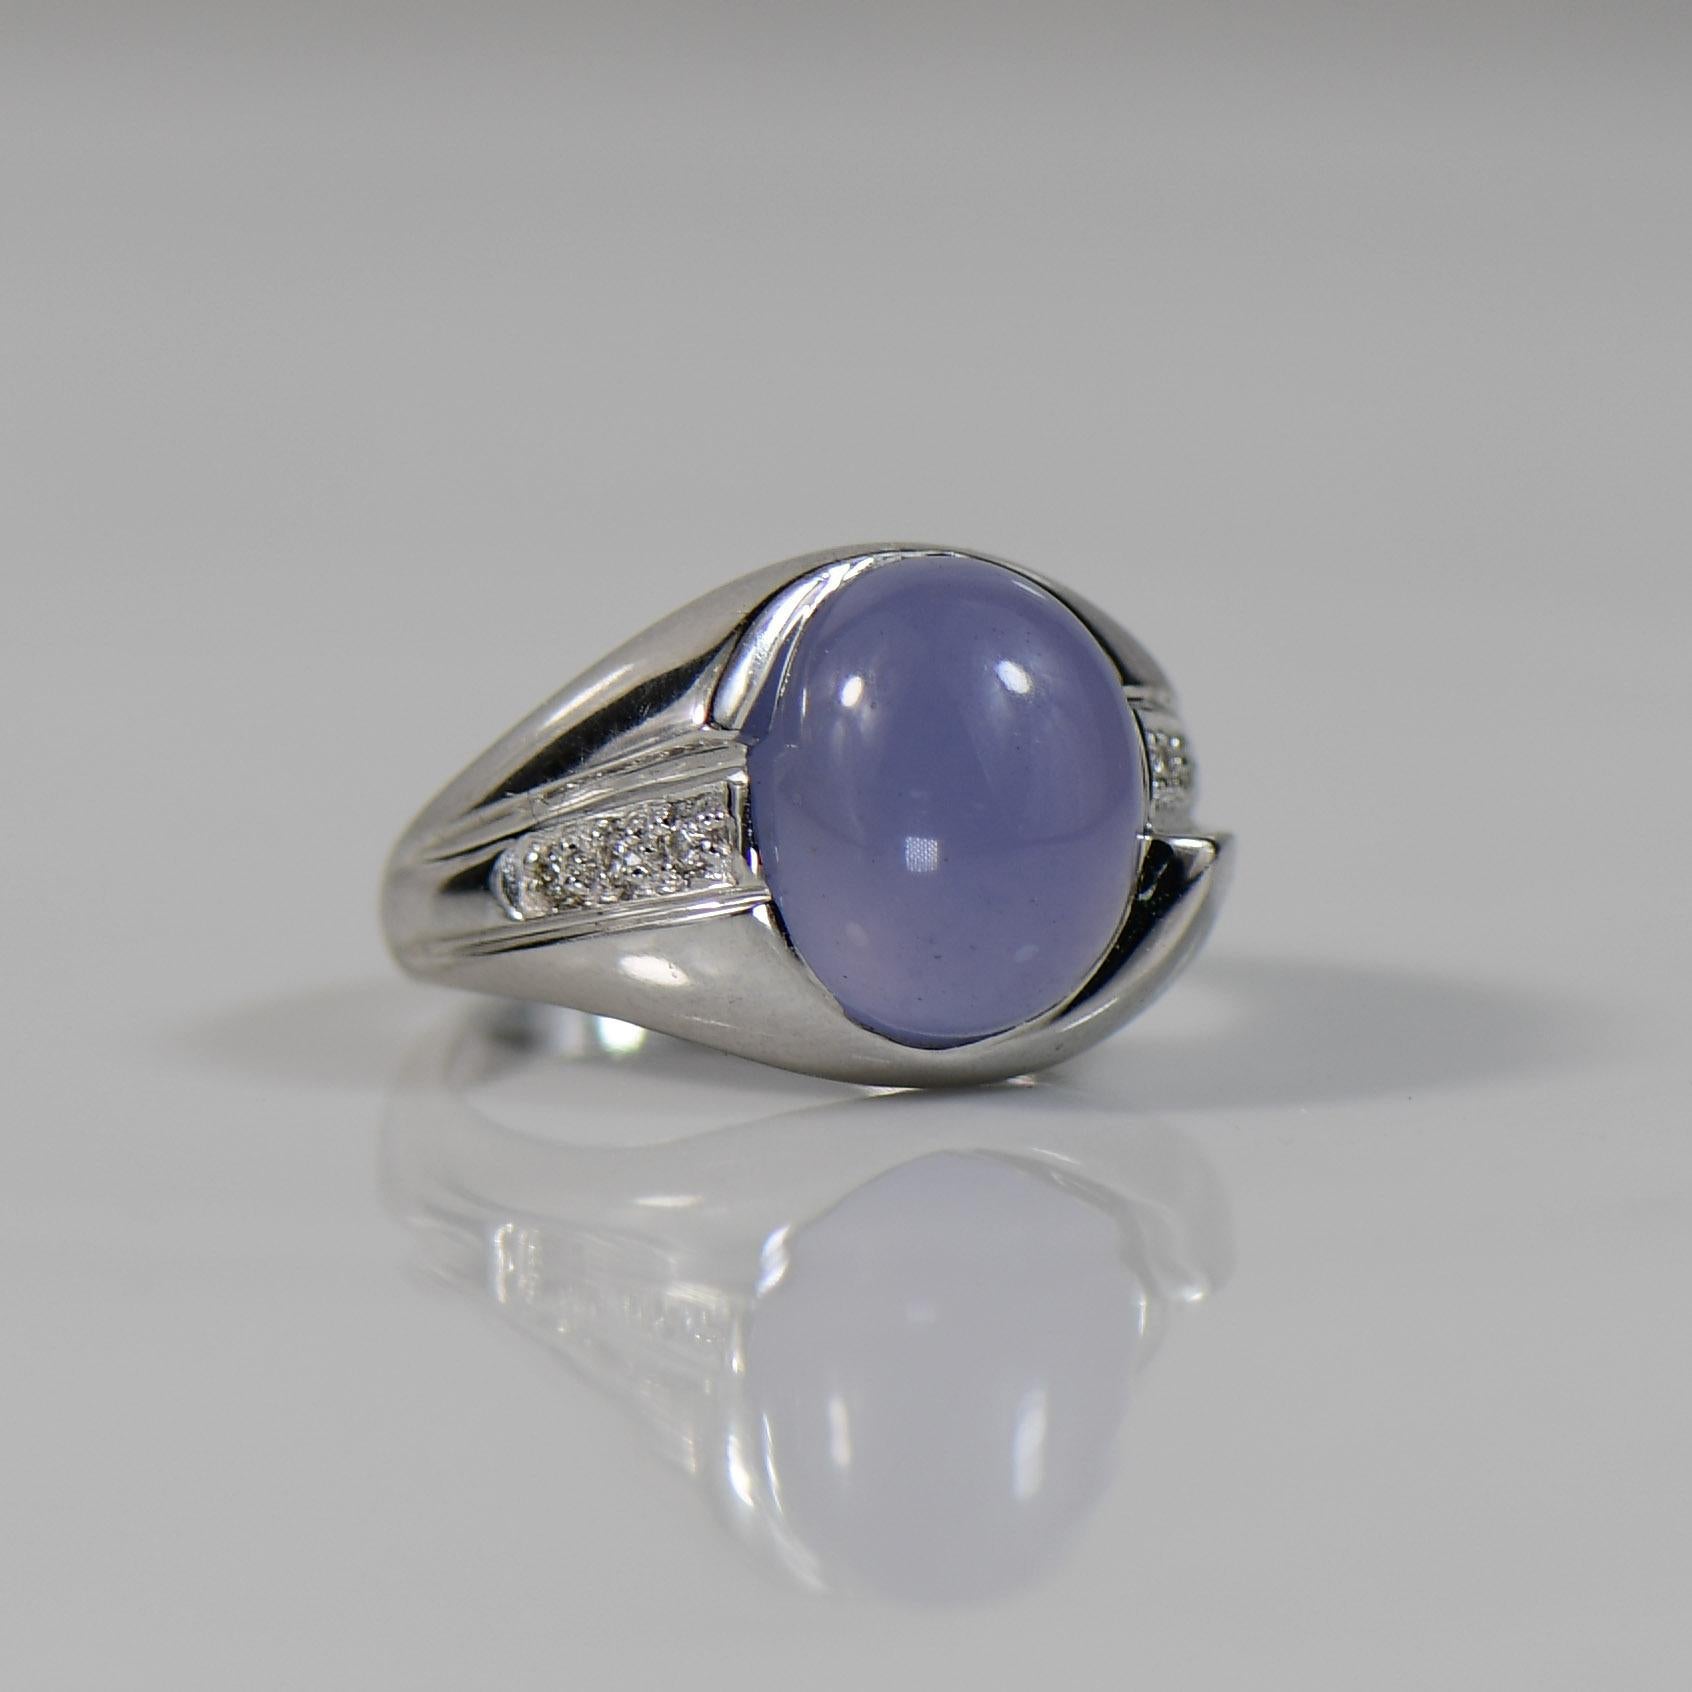 Set in lustrous 18K white gold, this stunning ring showcases a captivating Sapphire Cabochon at its center, its smooth surface emphasizing the rich, velvety hues of the precious gemstone. Framed by a delicate arrangement of diamonds, the ring